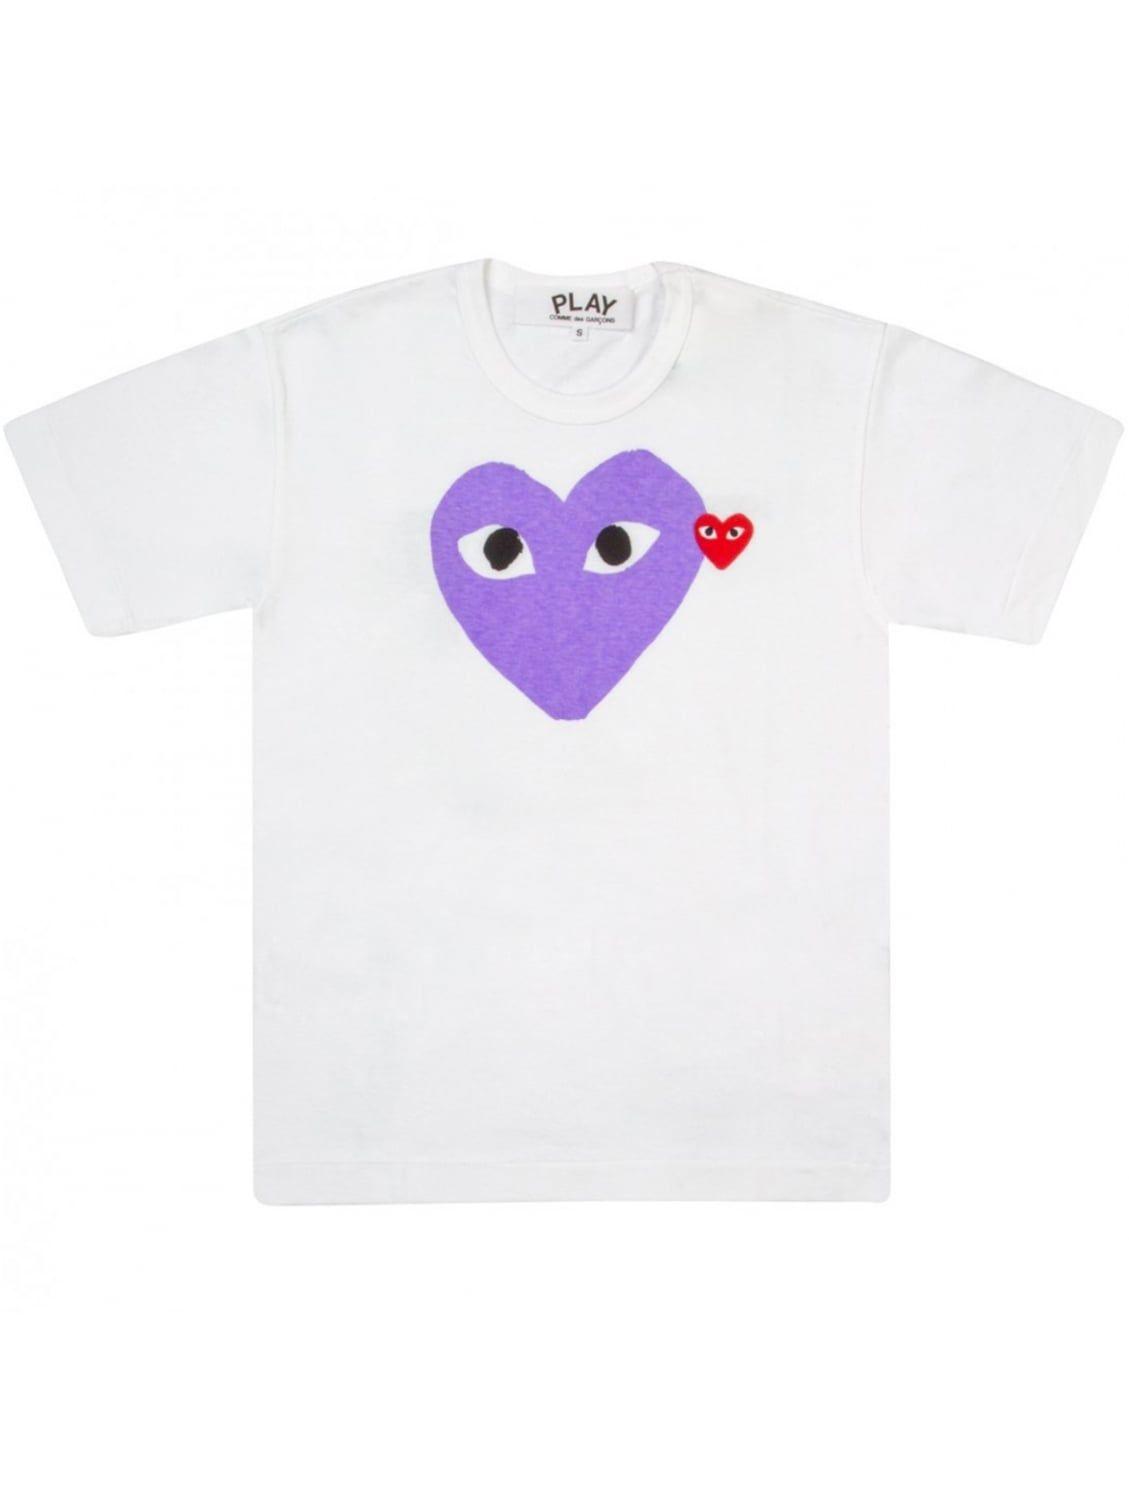 CDG Play Logo - Comme Des Garcons Clothing. PLAY Ladies Lilac Heart Logo T Shirt